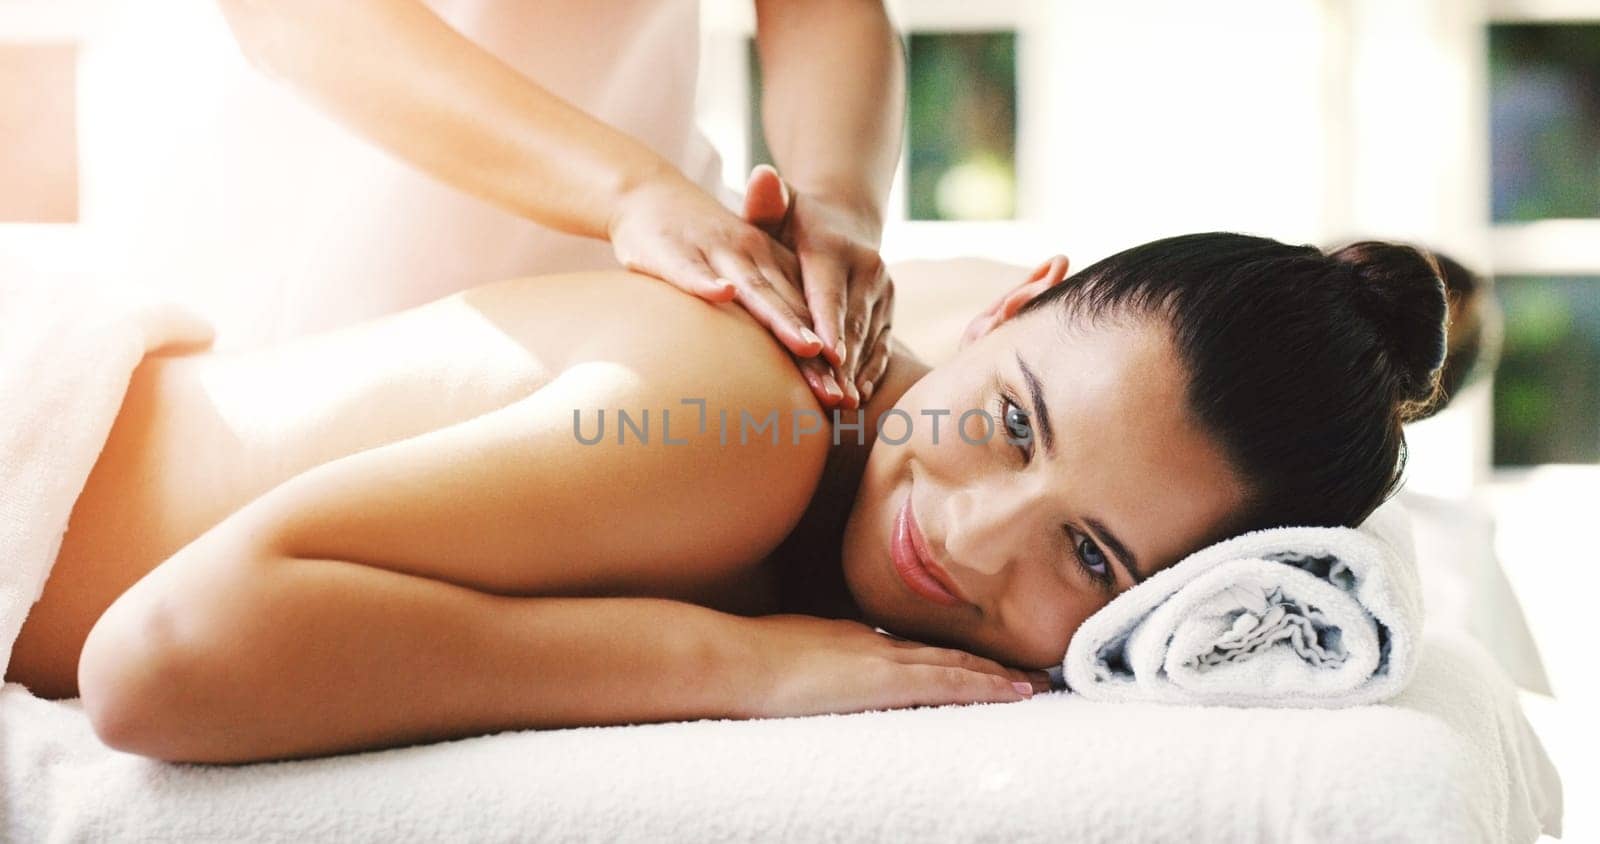 Happy woman, relax and massage at spa for healthy wellness, skincare or stress relief at resort. Calm female person relaxing with smile in peaceful zen or luxury body and back treatment at the salon by YuriArcurs